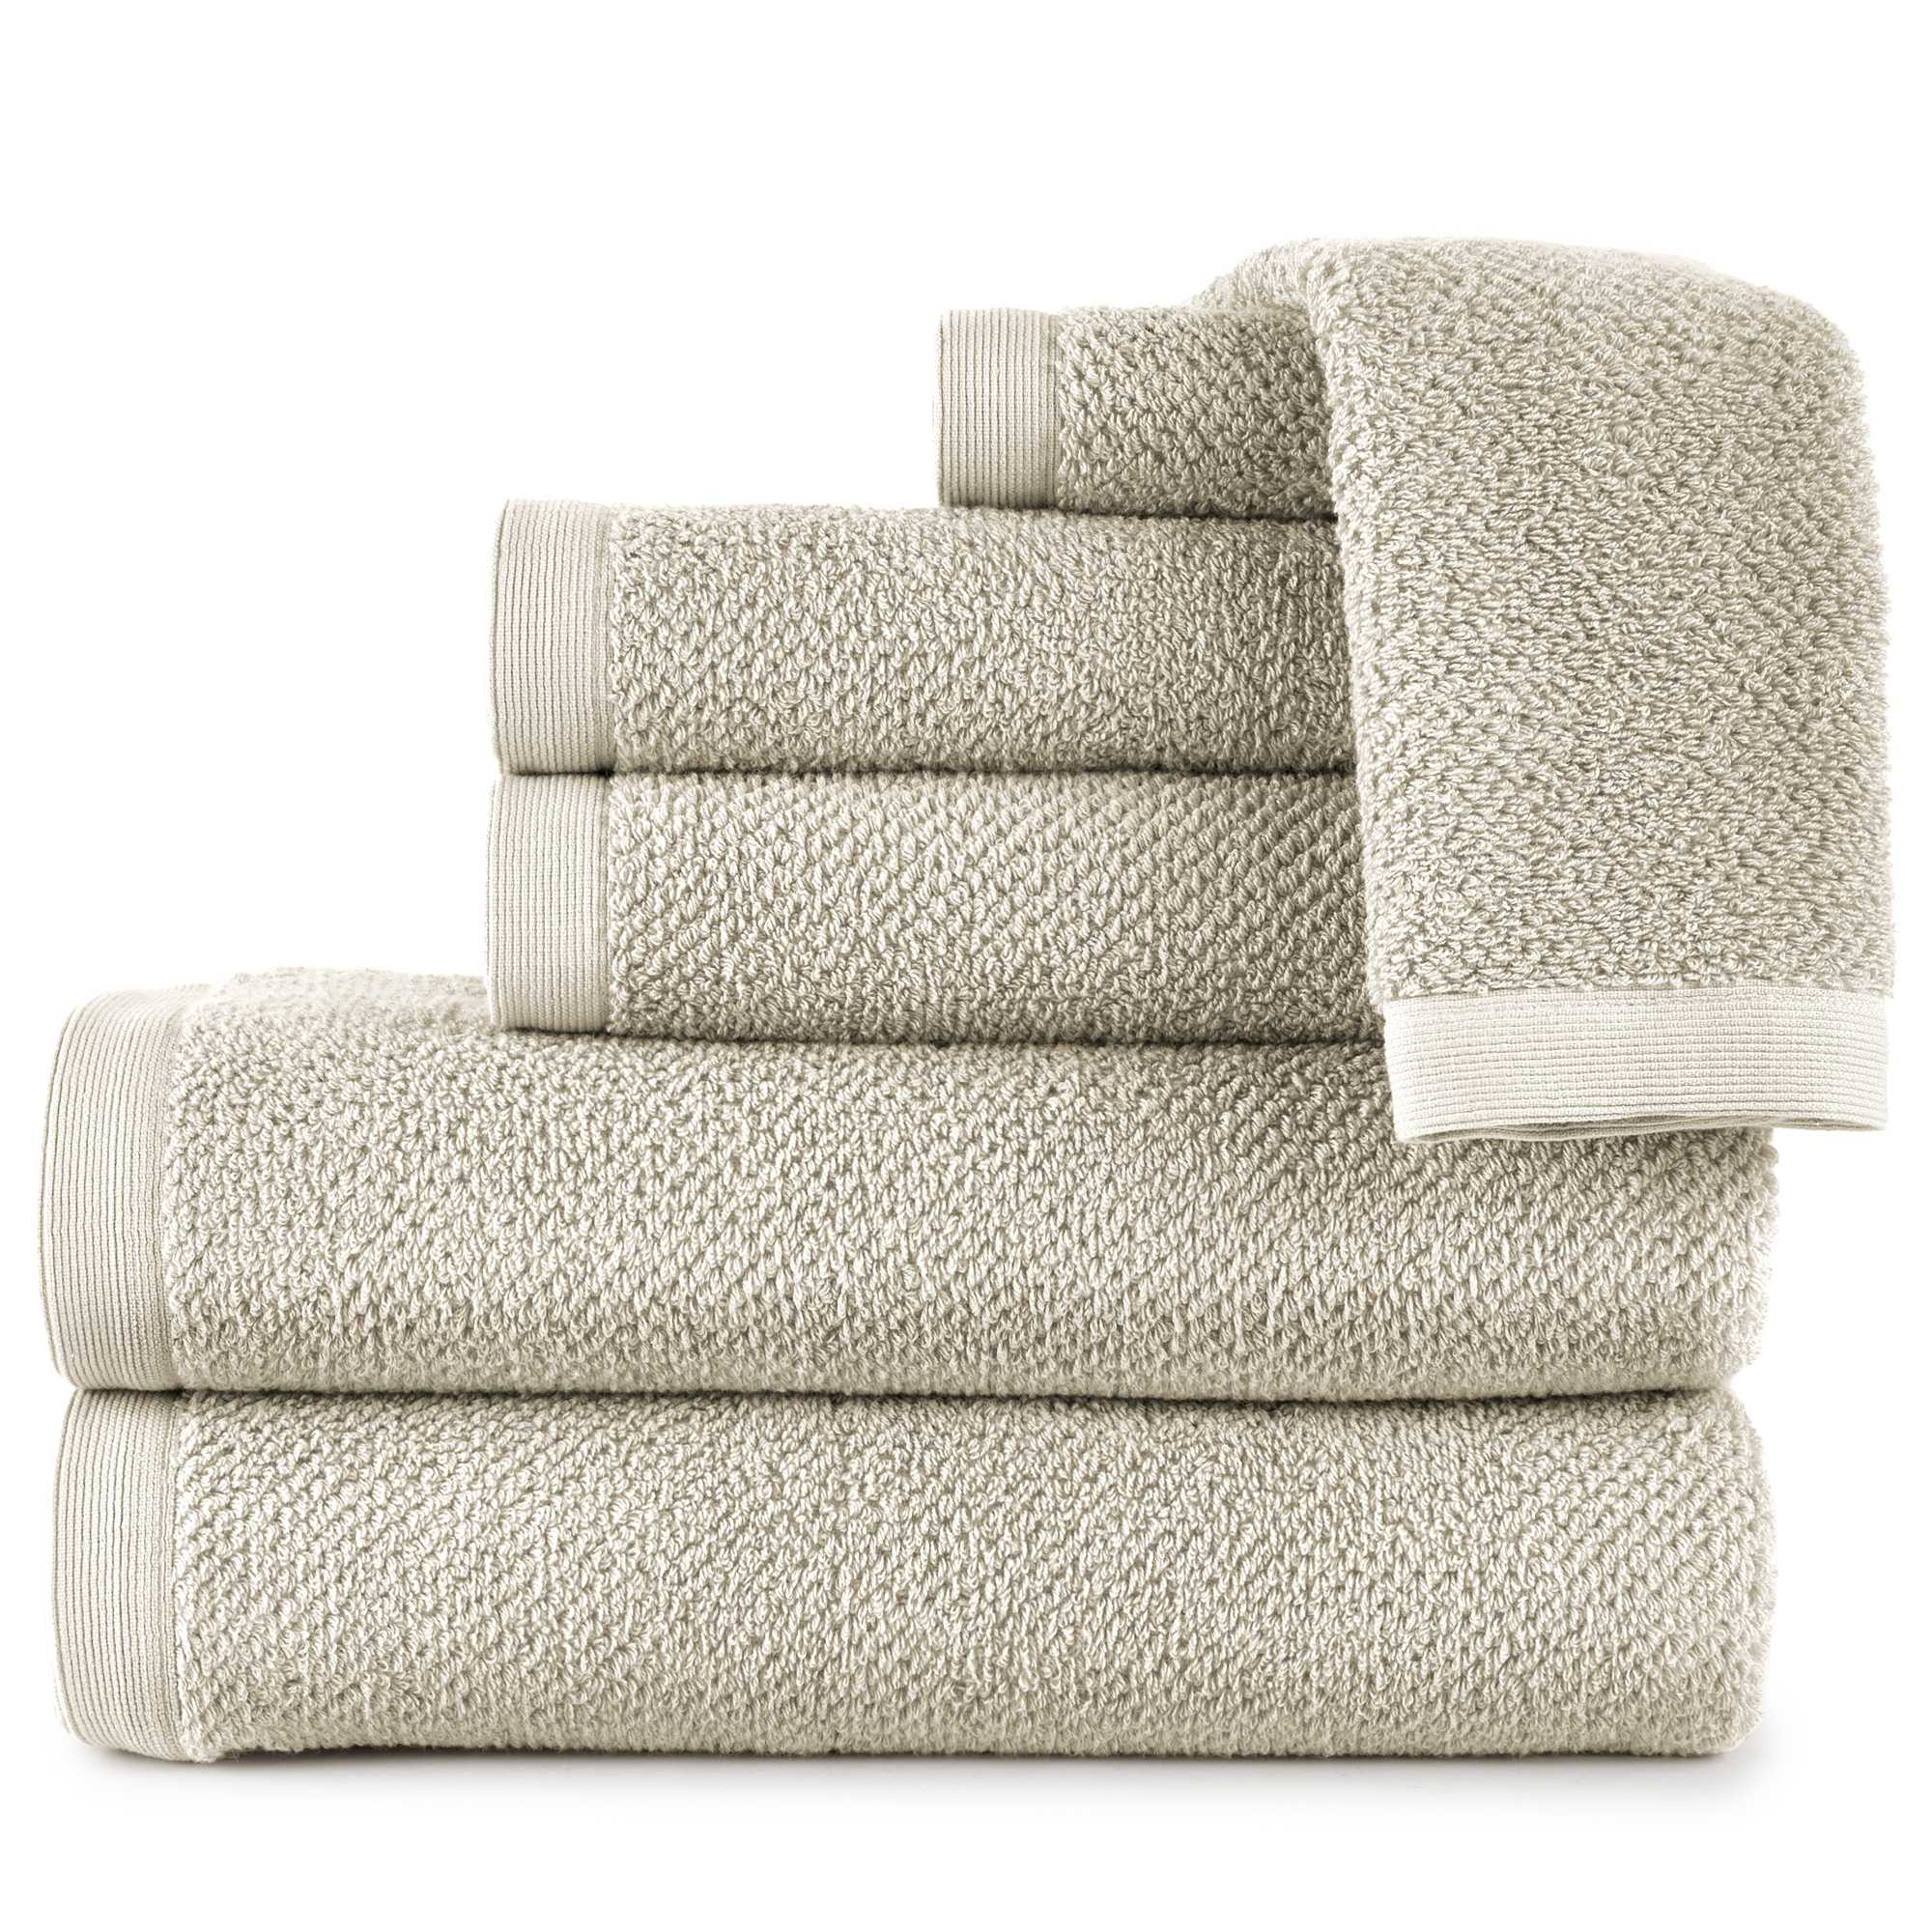 Quick Guide to Towel Care